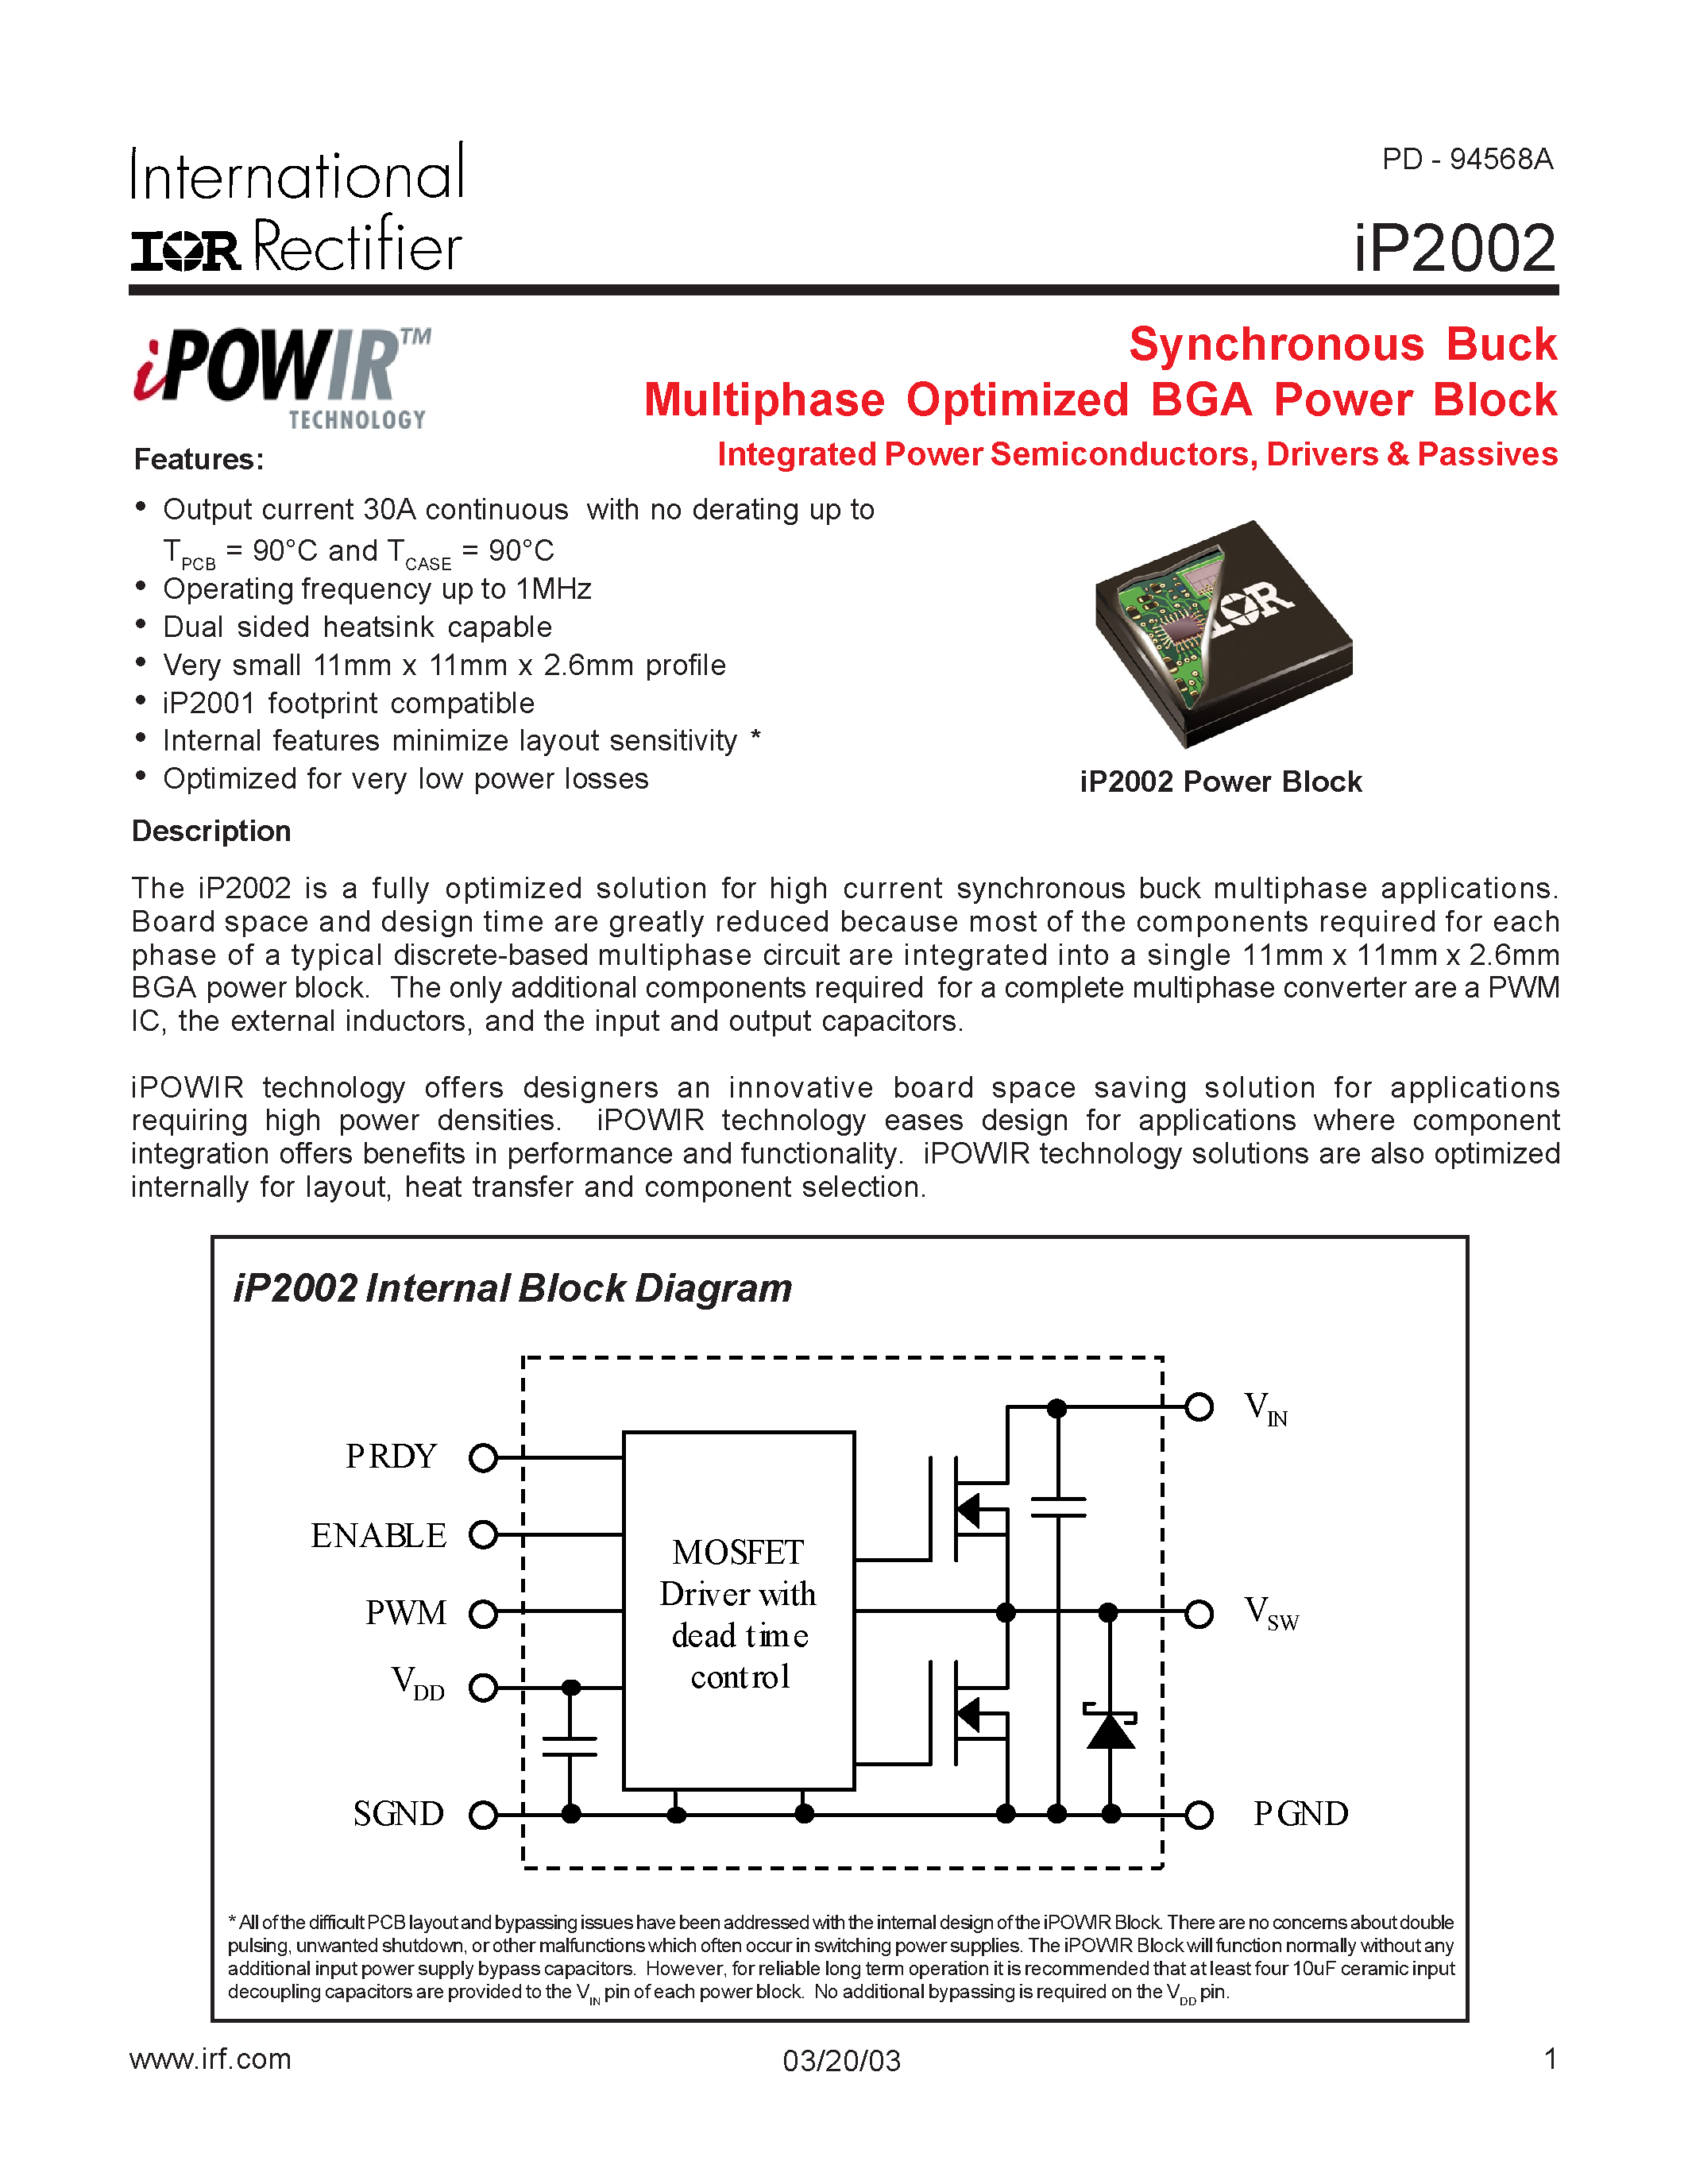 Datasheet IP2002 - Synchronous Buck Synchronous Buck Integrated Power Semiconductors/ Drivers & Passives page 1